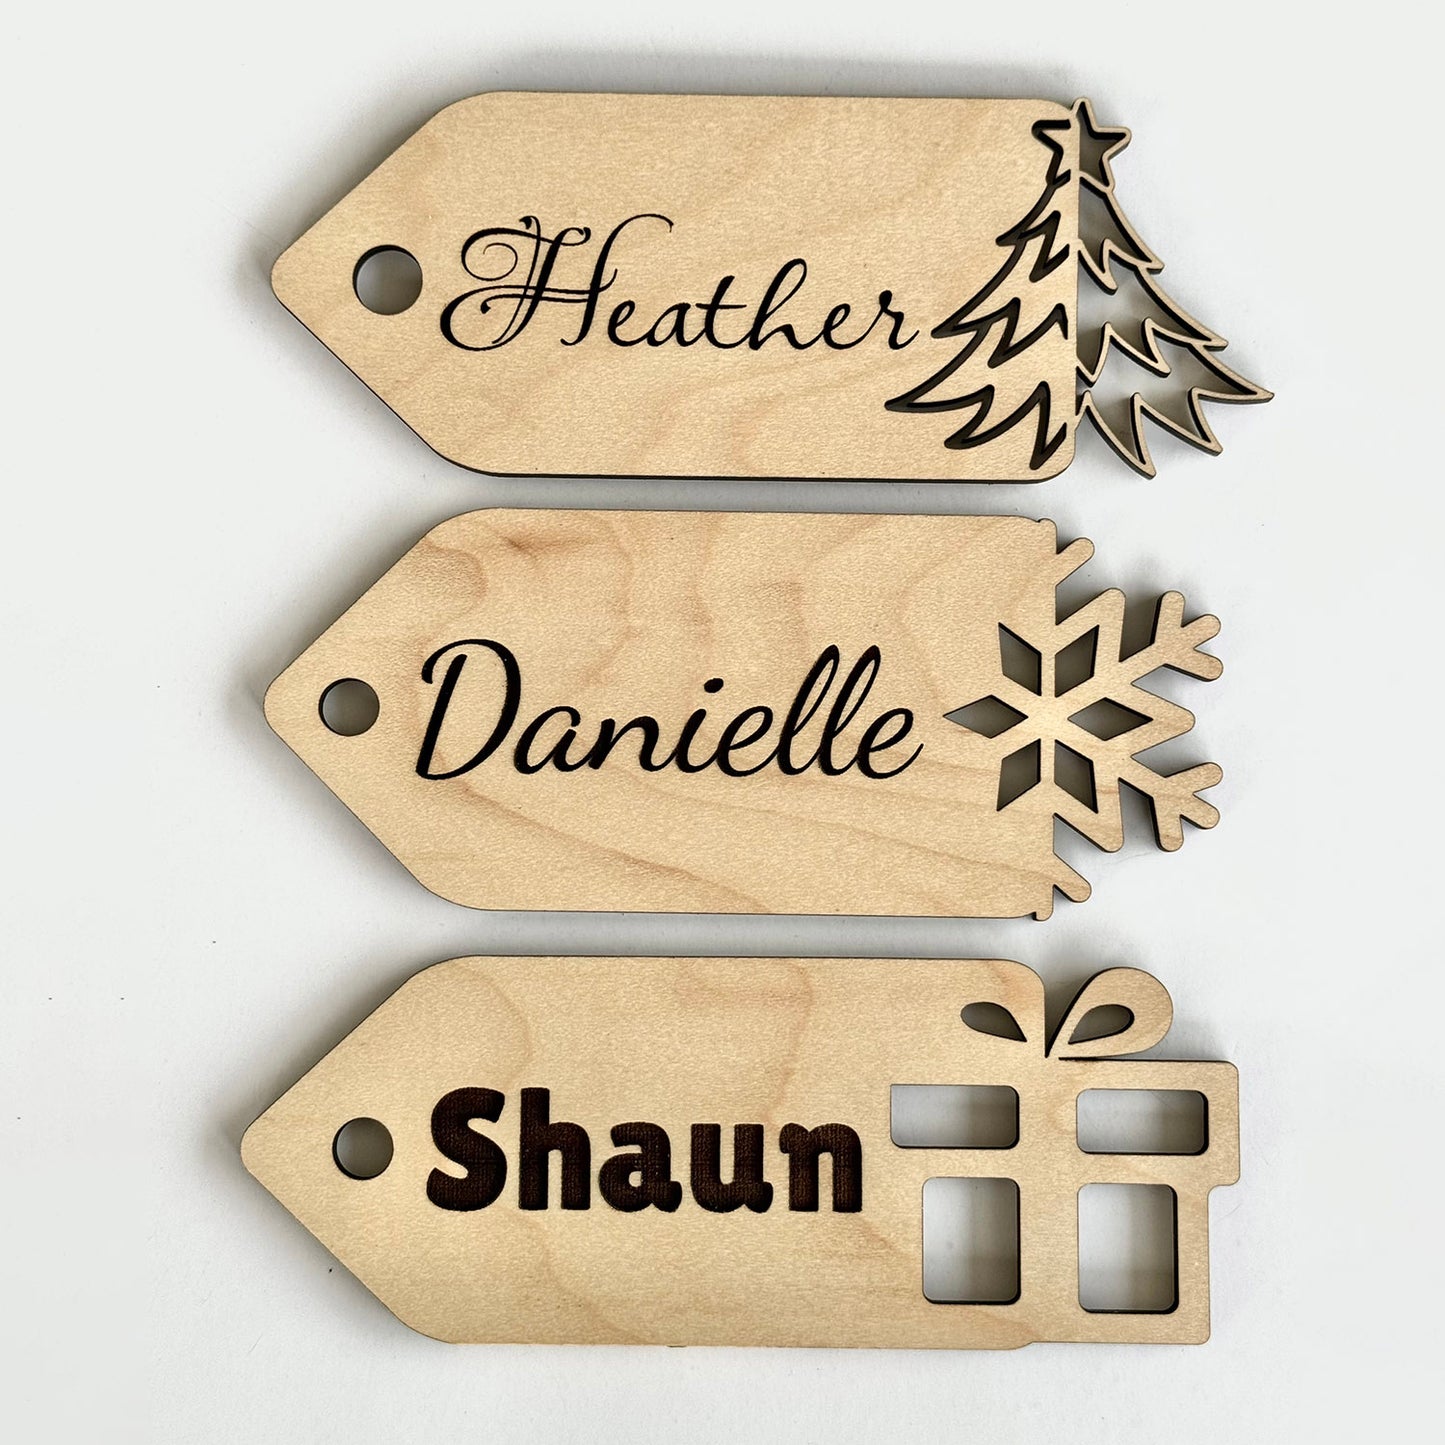 Christmas Stocking Names, Laser cut names, Stocking name tags, Gift ta –  Thistle and Lace Designs